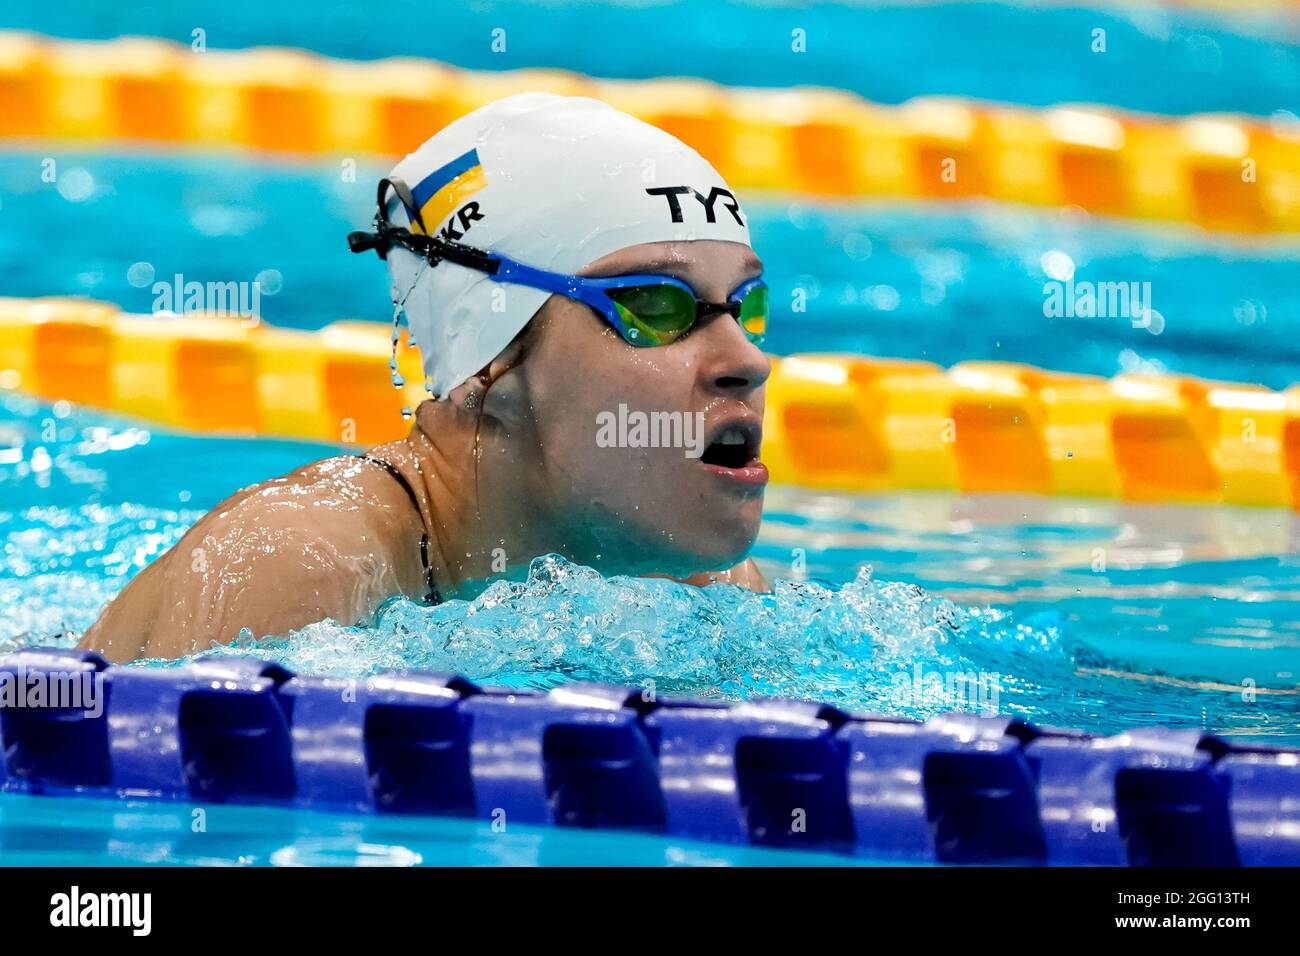 TOKYO, JAPAN - AUGUST 28: Viktoriia Savtsova of Ukraine competing in the Women's 100m Breaststroke SB6 Heats during the Tokyo 2020 Paralympic Games at Tokyo Aquatics Centre on August 28, 2021 in Tokyo, Japan (Photo by Ilse Schaffers/Orange Pictures) NOCNSF Stock Photo